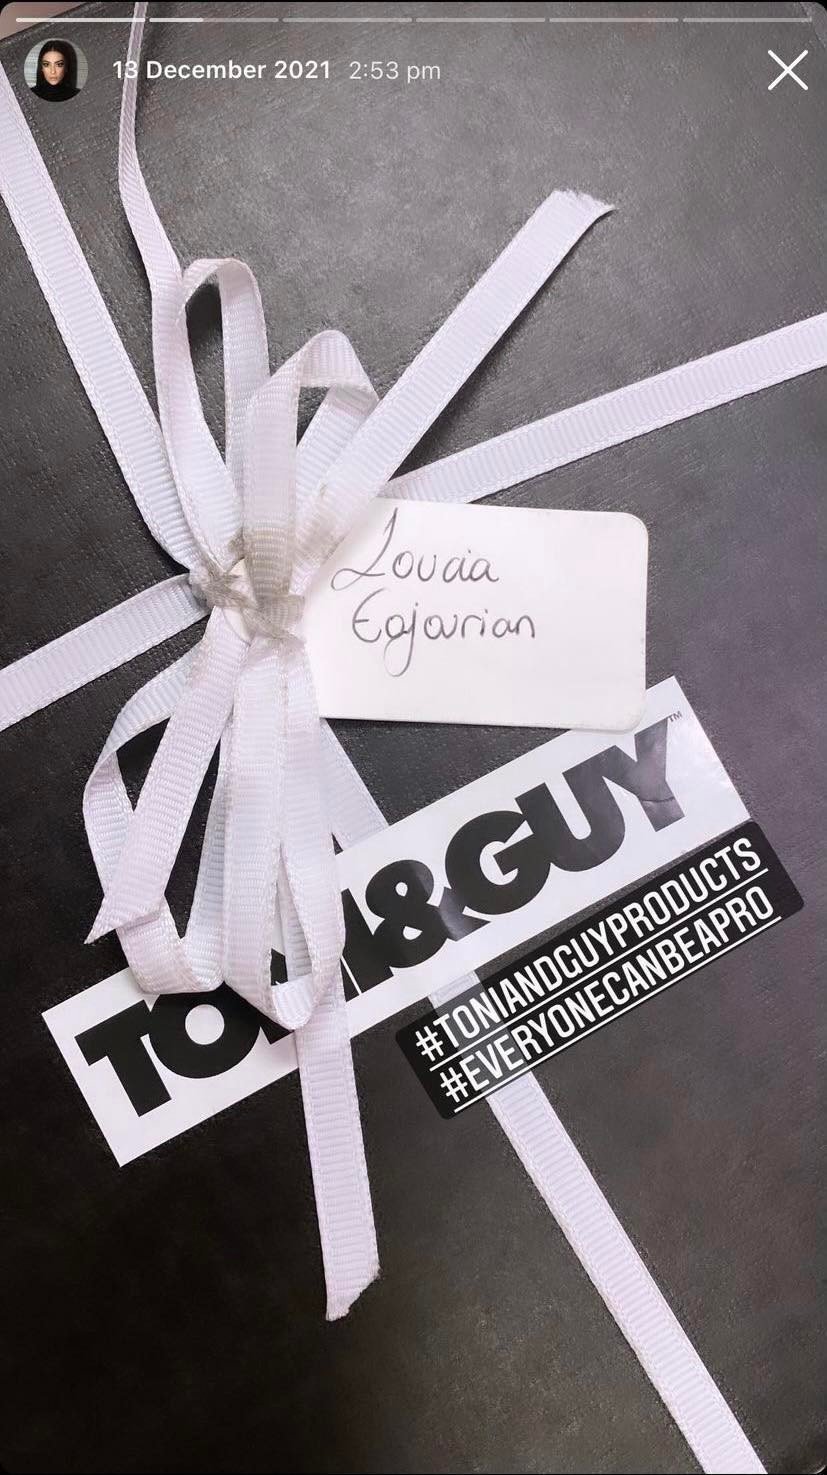 Toni & Guy Products Cyprus -  #EveryoneCanBeAPro 